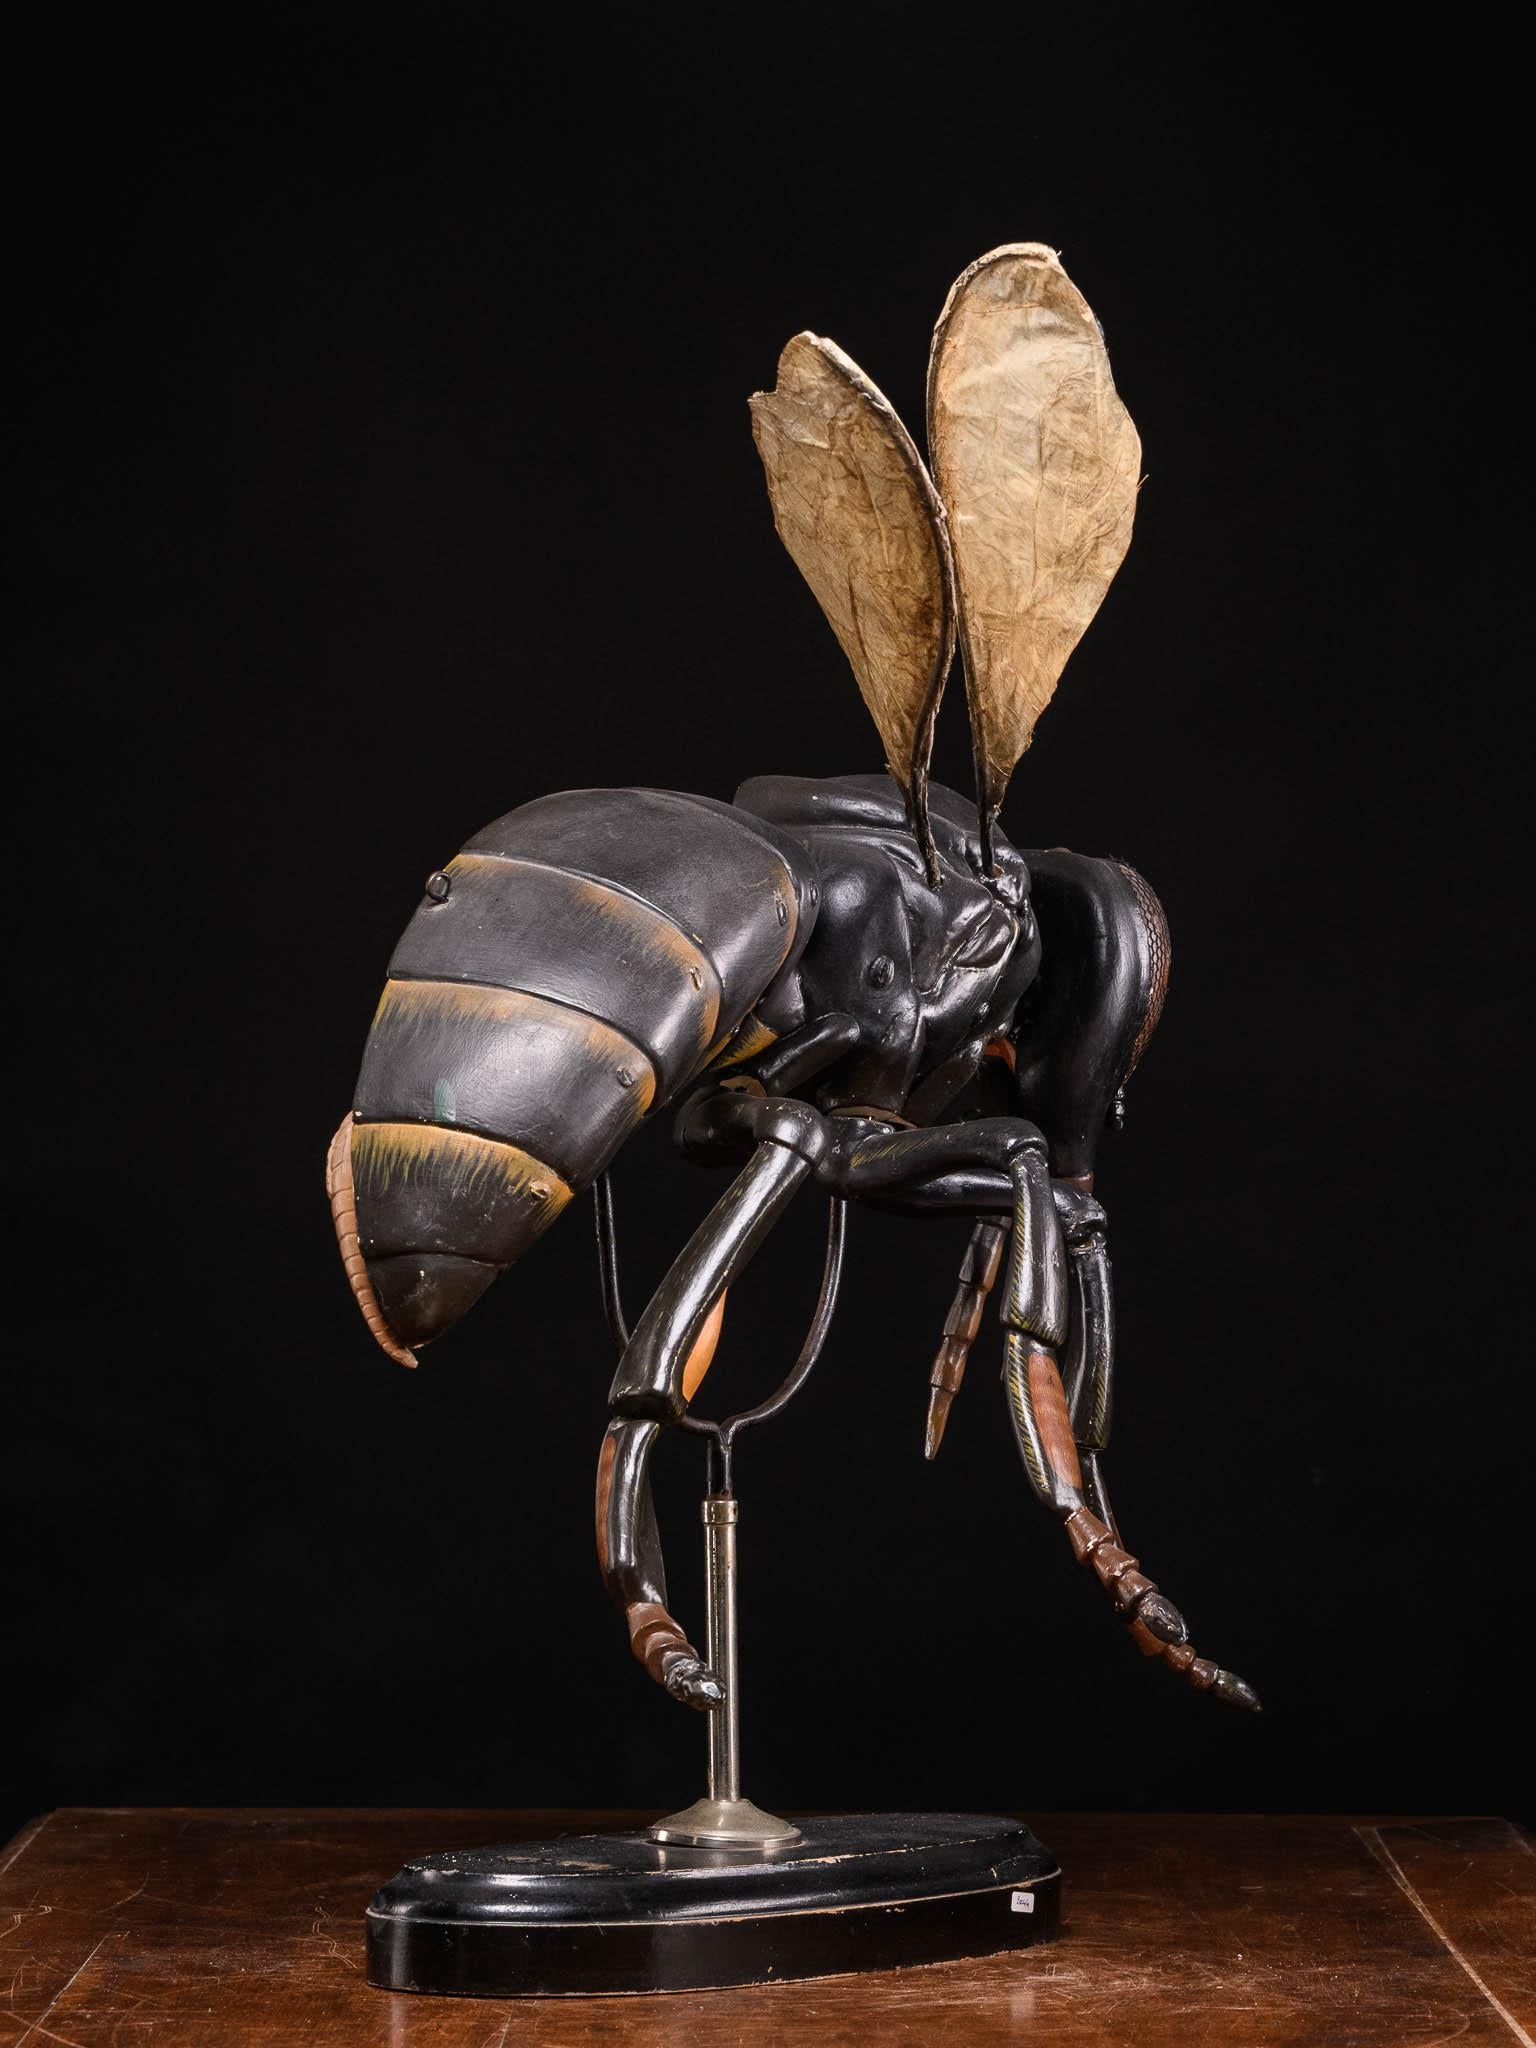 Large Didactical Model of a Bee labeled “ Denoyer-Geppert Company of Chicago 